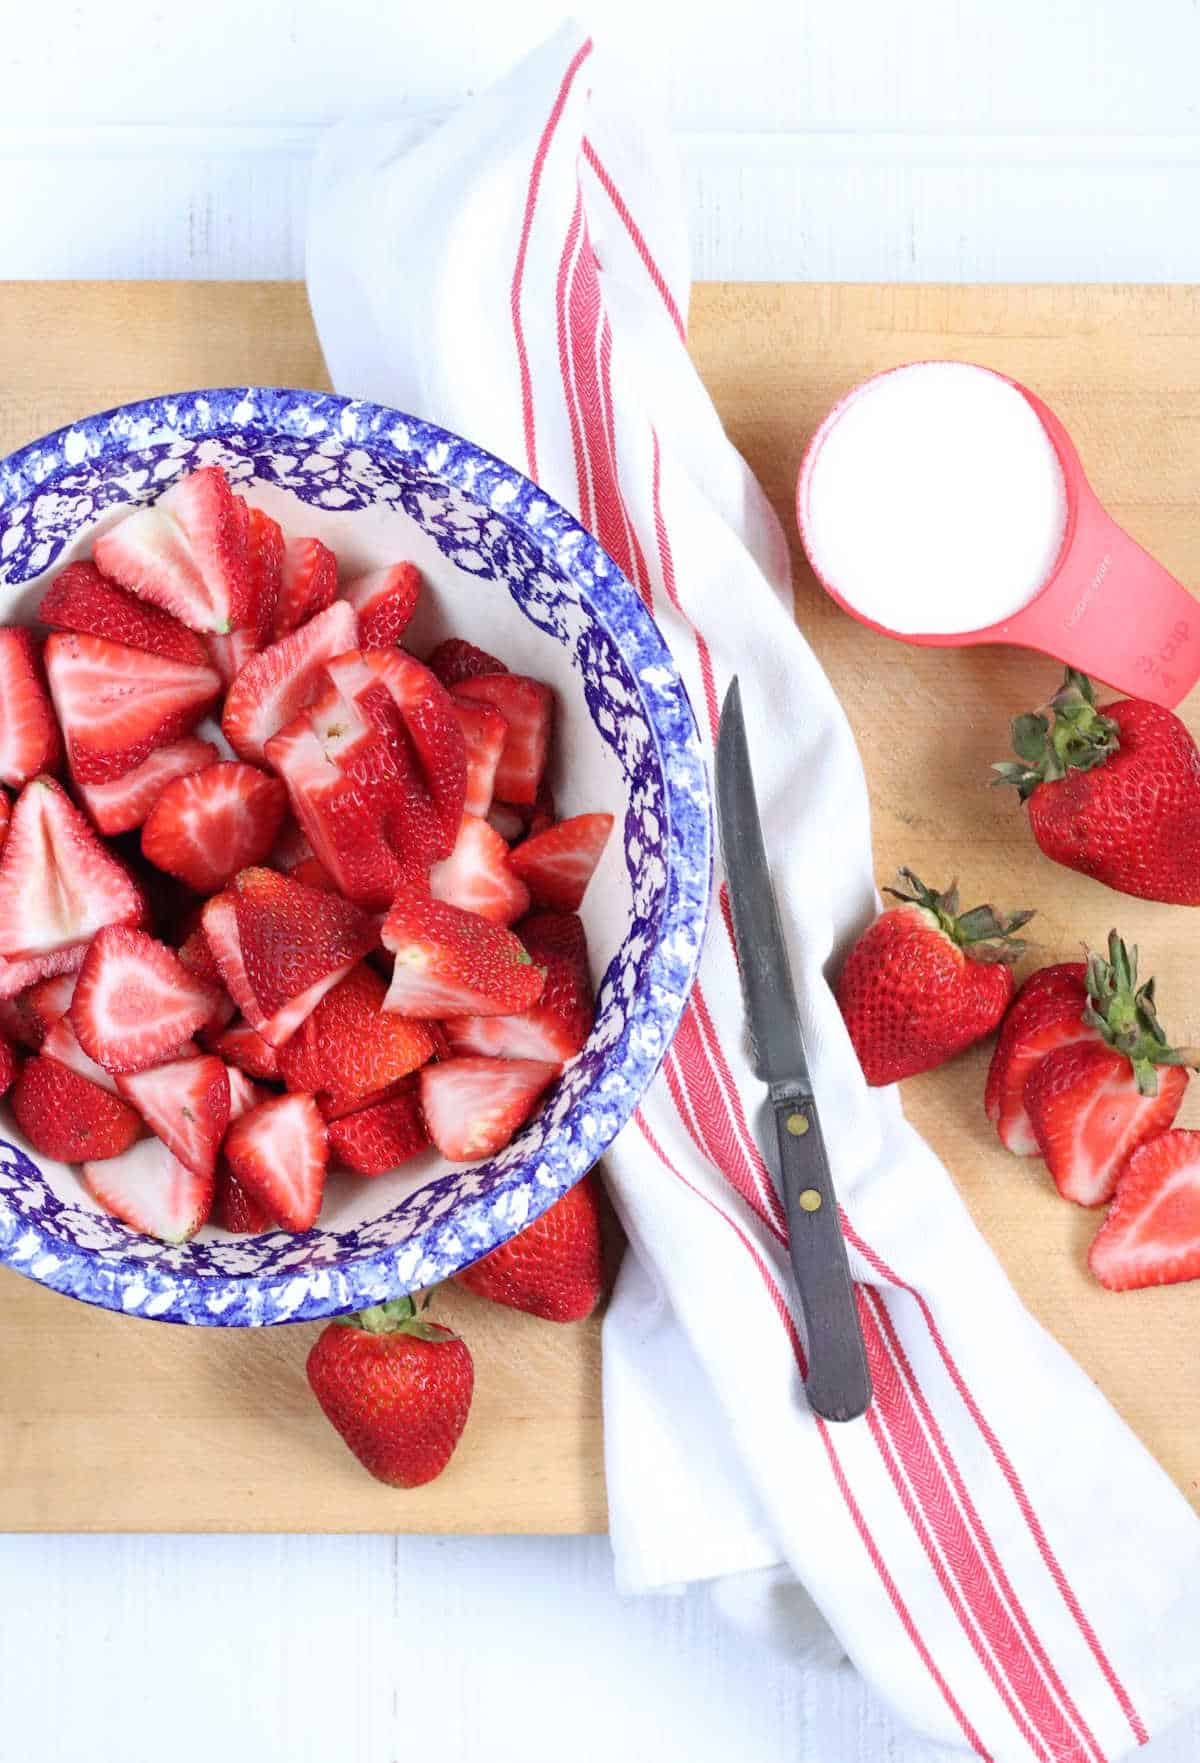 Blue speckled rim bowl with strawberry slices on wooden cutting board with knife and white/red striped kitchen towel.